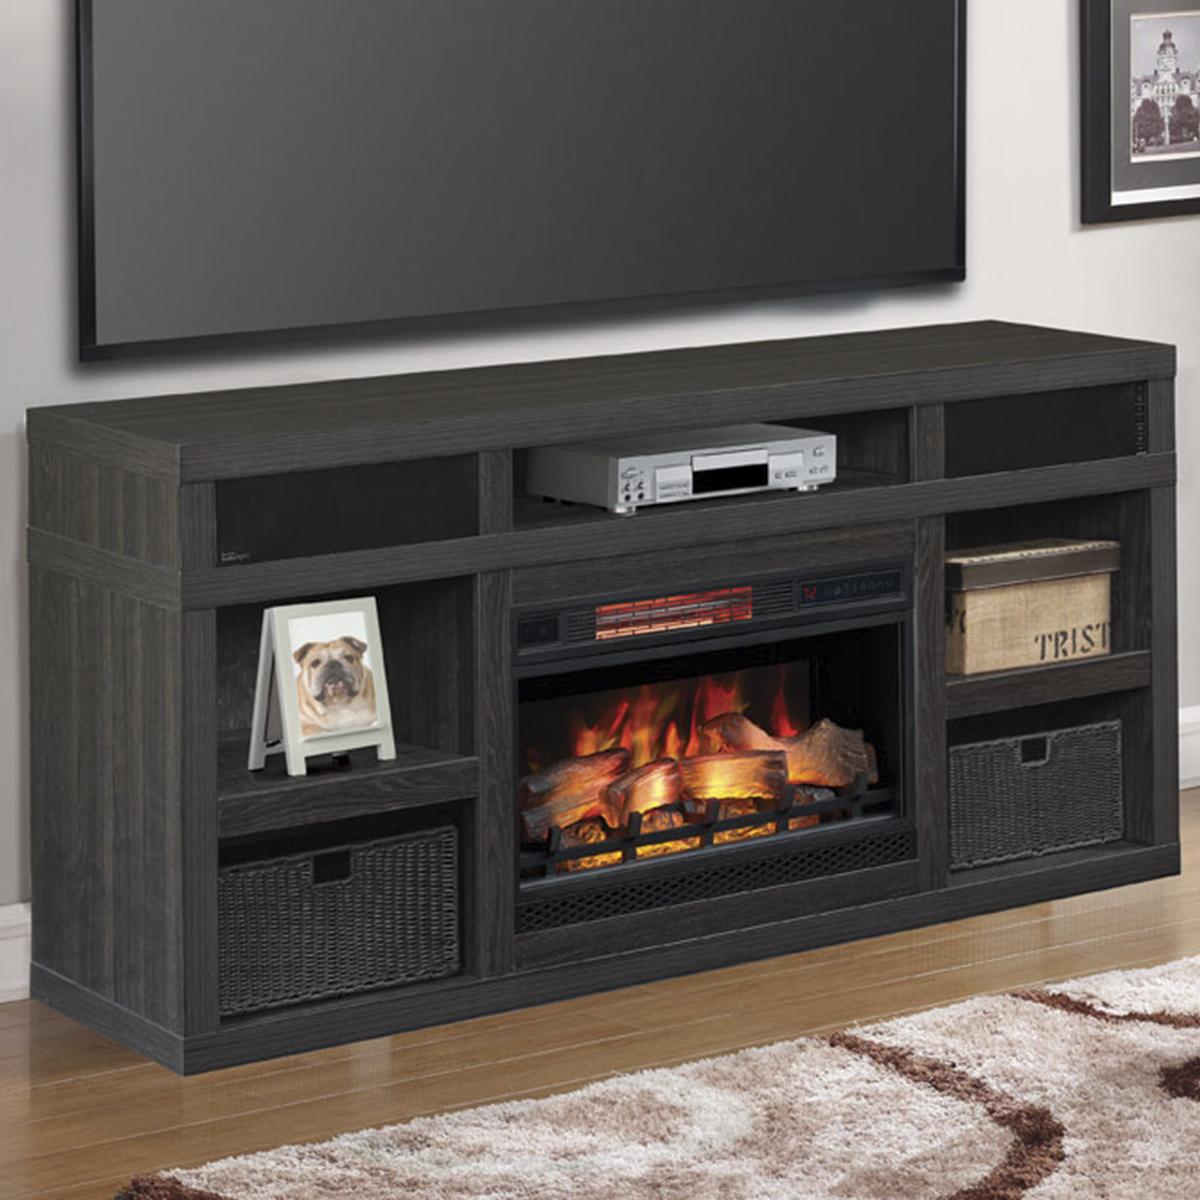 Tv Above Fireplace where to Put Cable Box Luxury Fabio Flames Greatlin 64" Tv Stand In Black Walnut